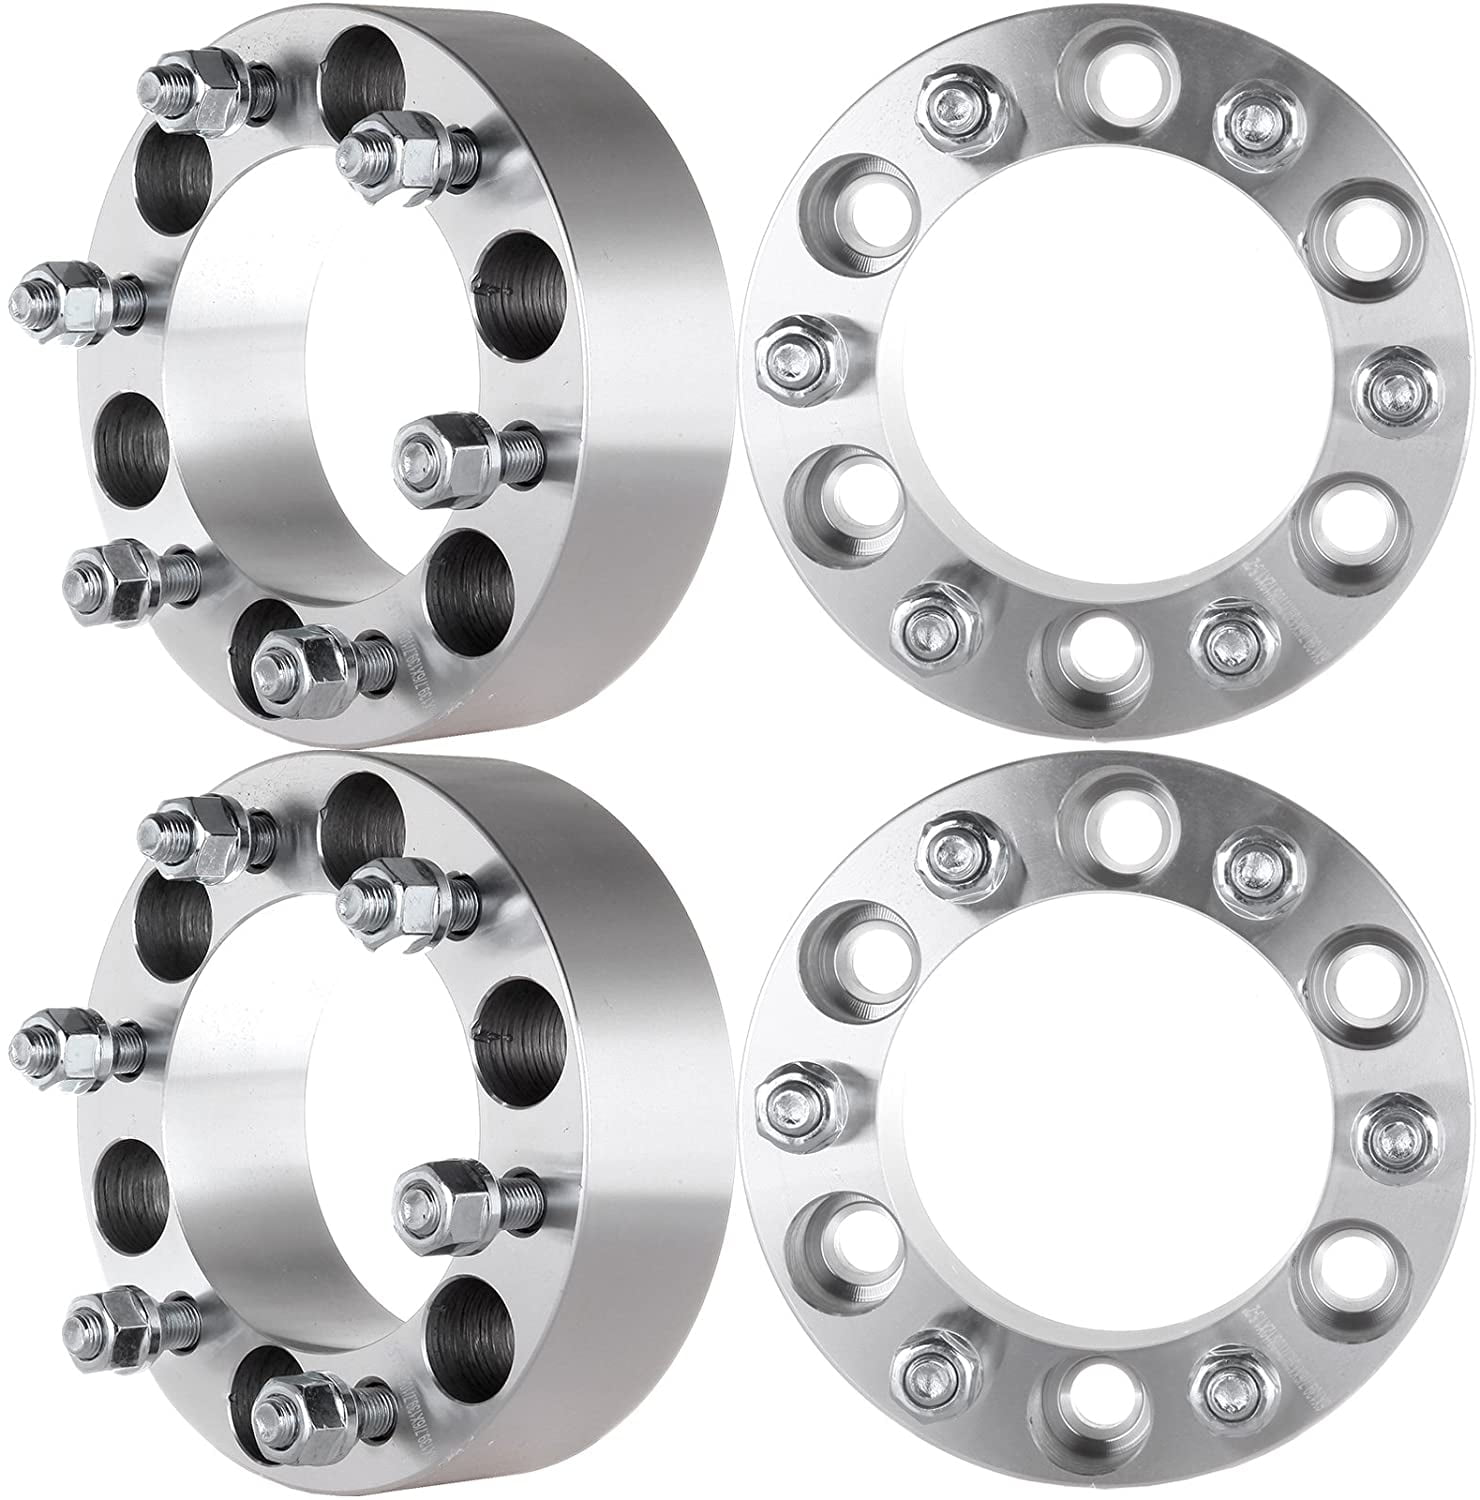 SCITOO Compatible with 2pc 2 inch 6x5.5 to 6x5.5 Wheel Spacers 12x1.5 Studs 6Lug Billet 2 fit Toyota Tacoma Pre Runner FJ Cruiser 4Runner Mitsubishi Montero Sport Isuzu